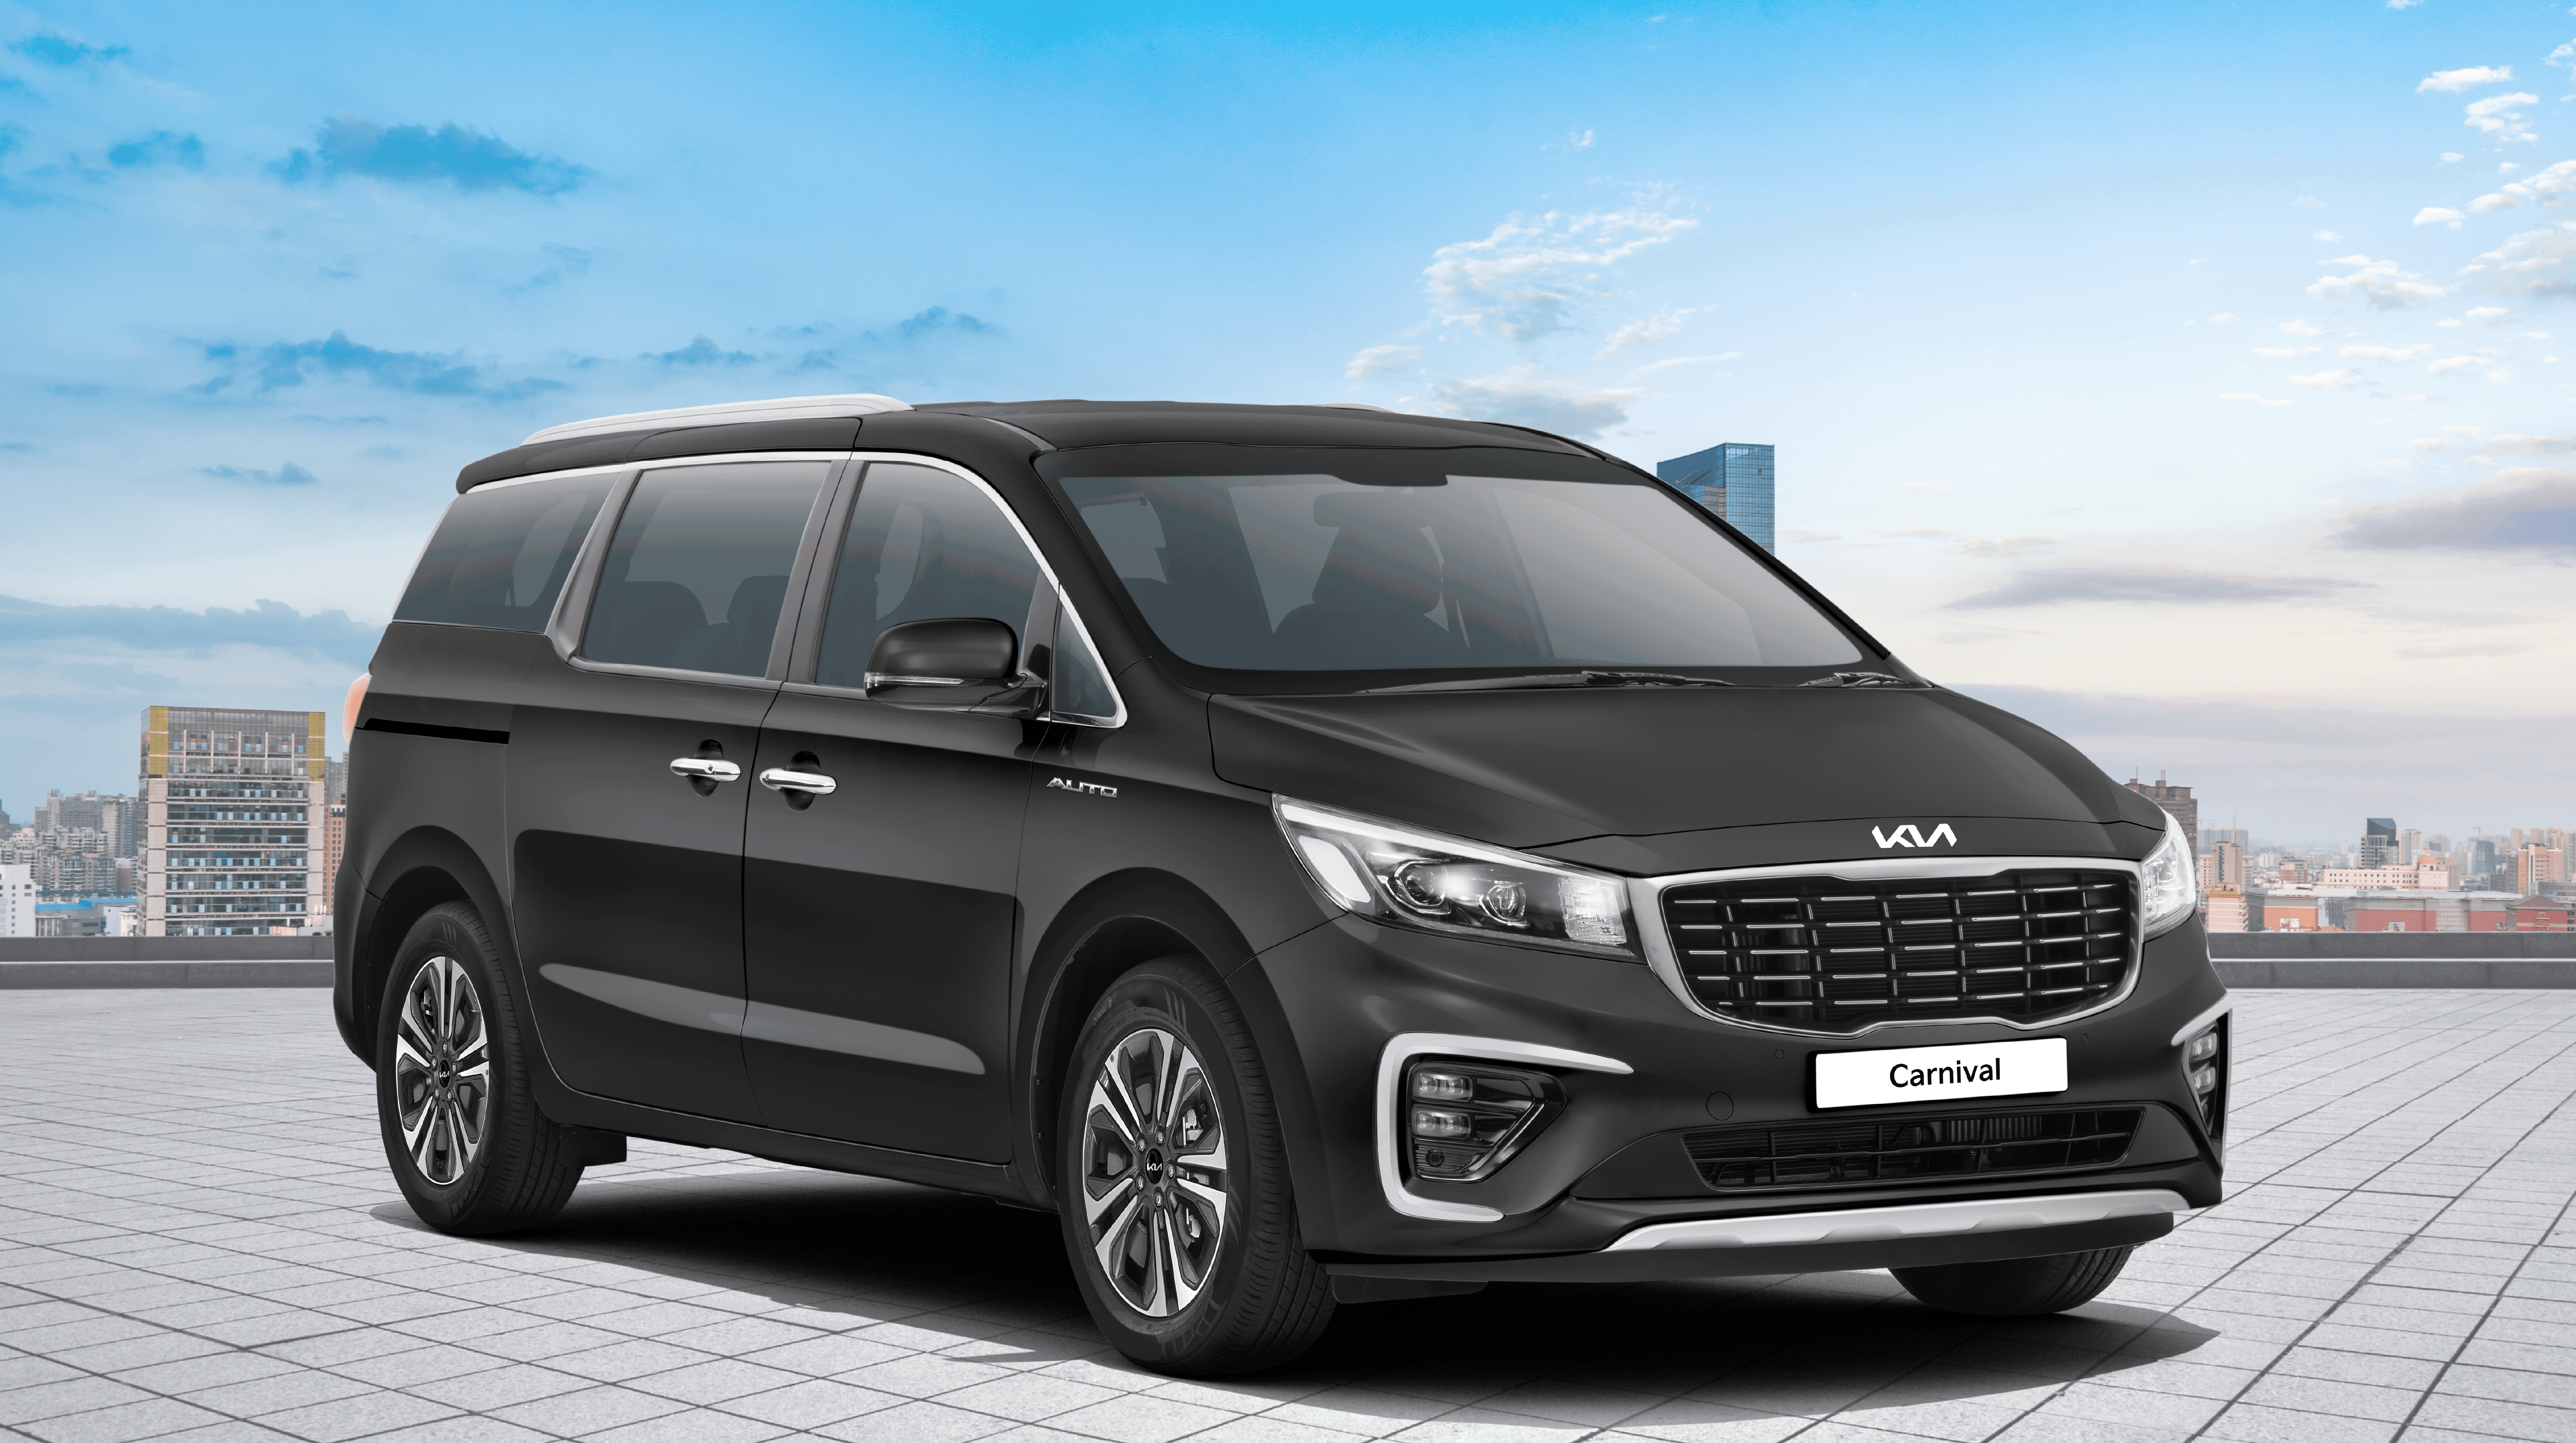 2021 Kia Carnival launched – Gets New Logo and 18-inch Alloy Wheels|2021 Kia Carnival